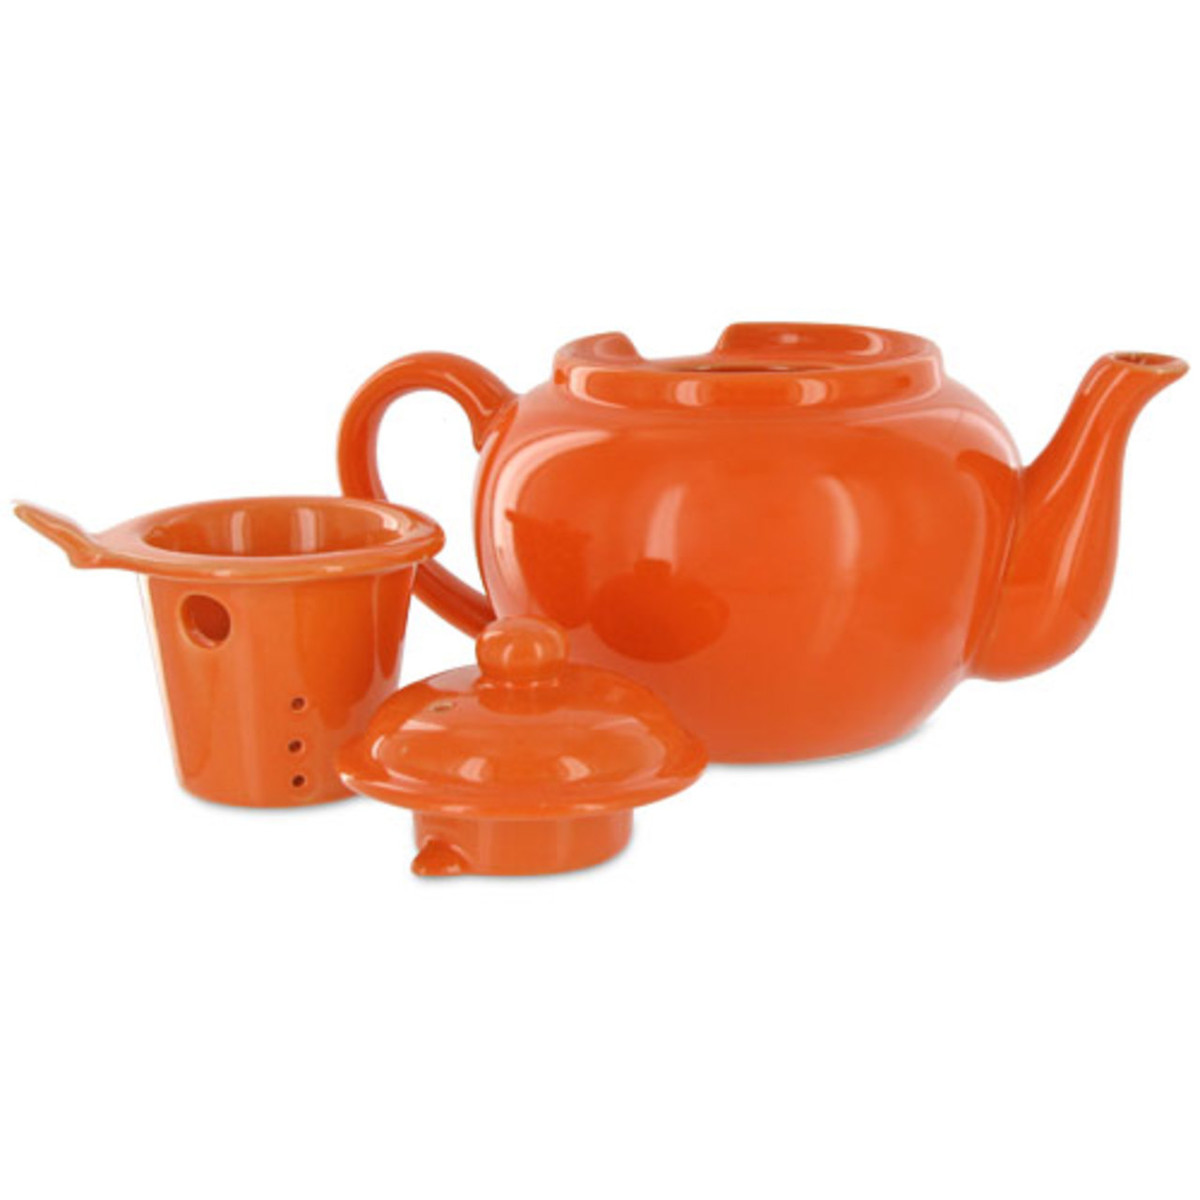 Amsterdam 2 Cup Infuser Teapot - Red